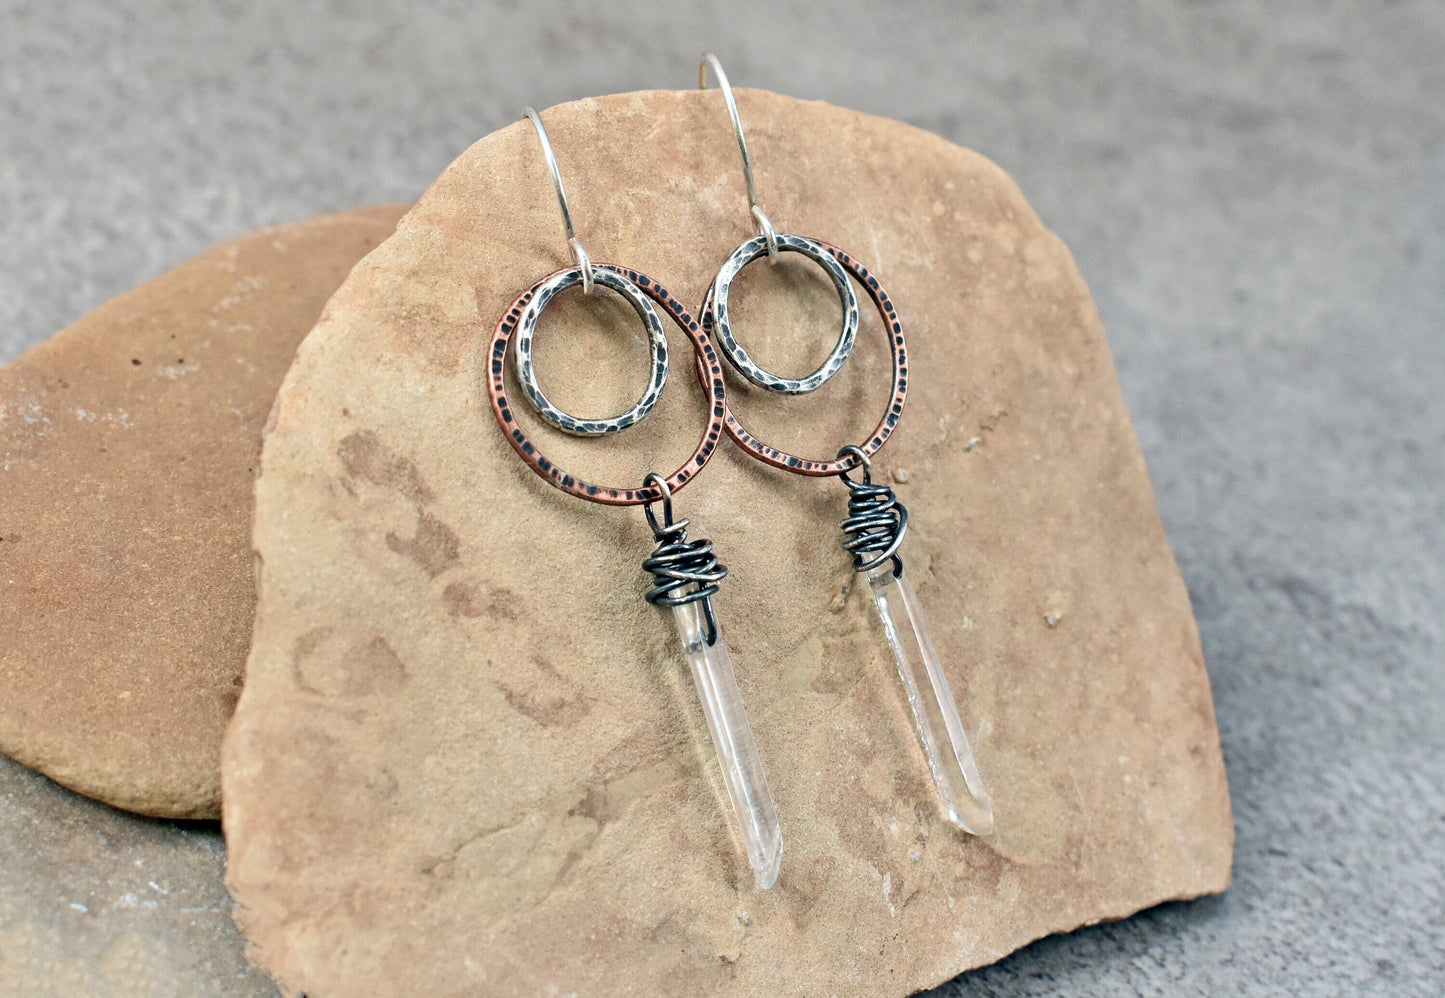 Quartz Crystal Point Earrings, Rustic Copper Circle Dangles, Mixed Metal Jewelry, Natural Raw Stone, Sterling Silver